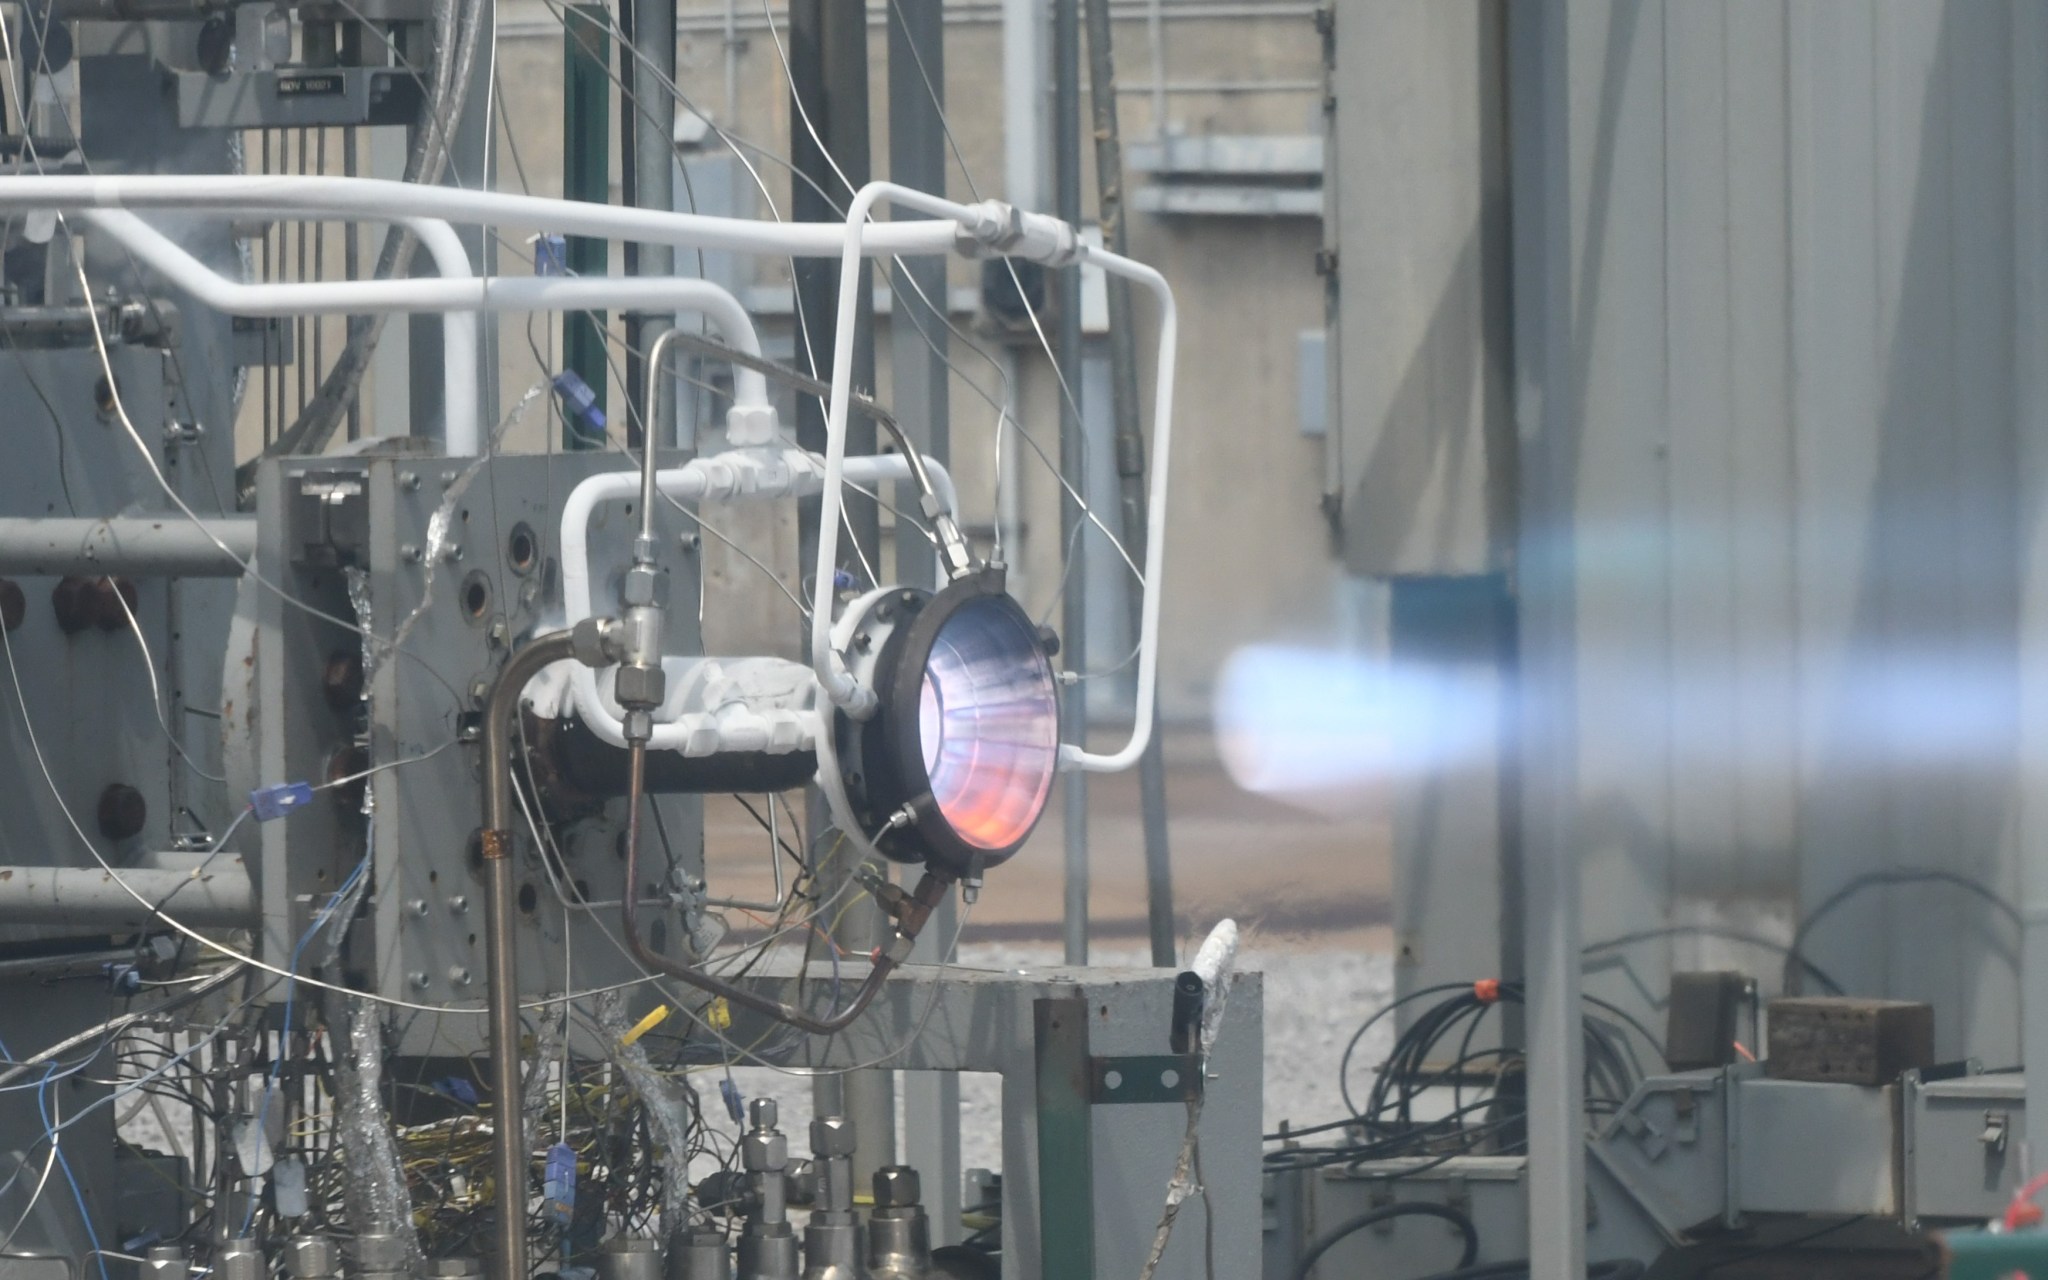 Hot-fire testing of GRX-810 injector and nozzle components at Marshall Test Stand 115 using liquid oxygen and liquid methane propellants.